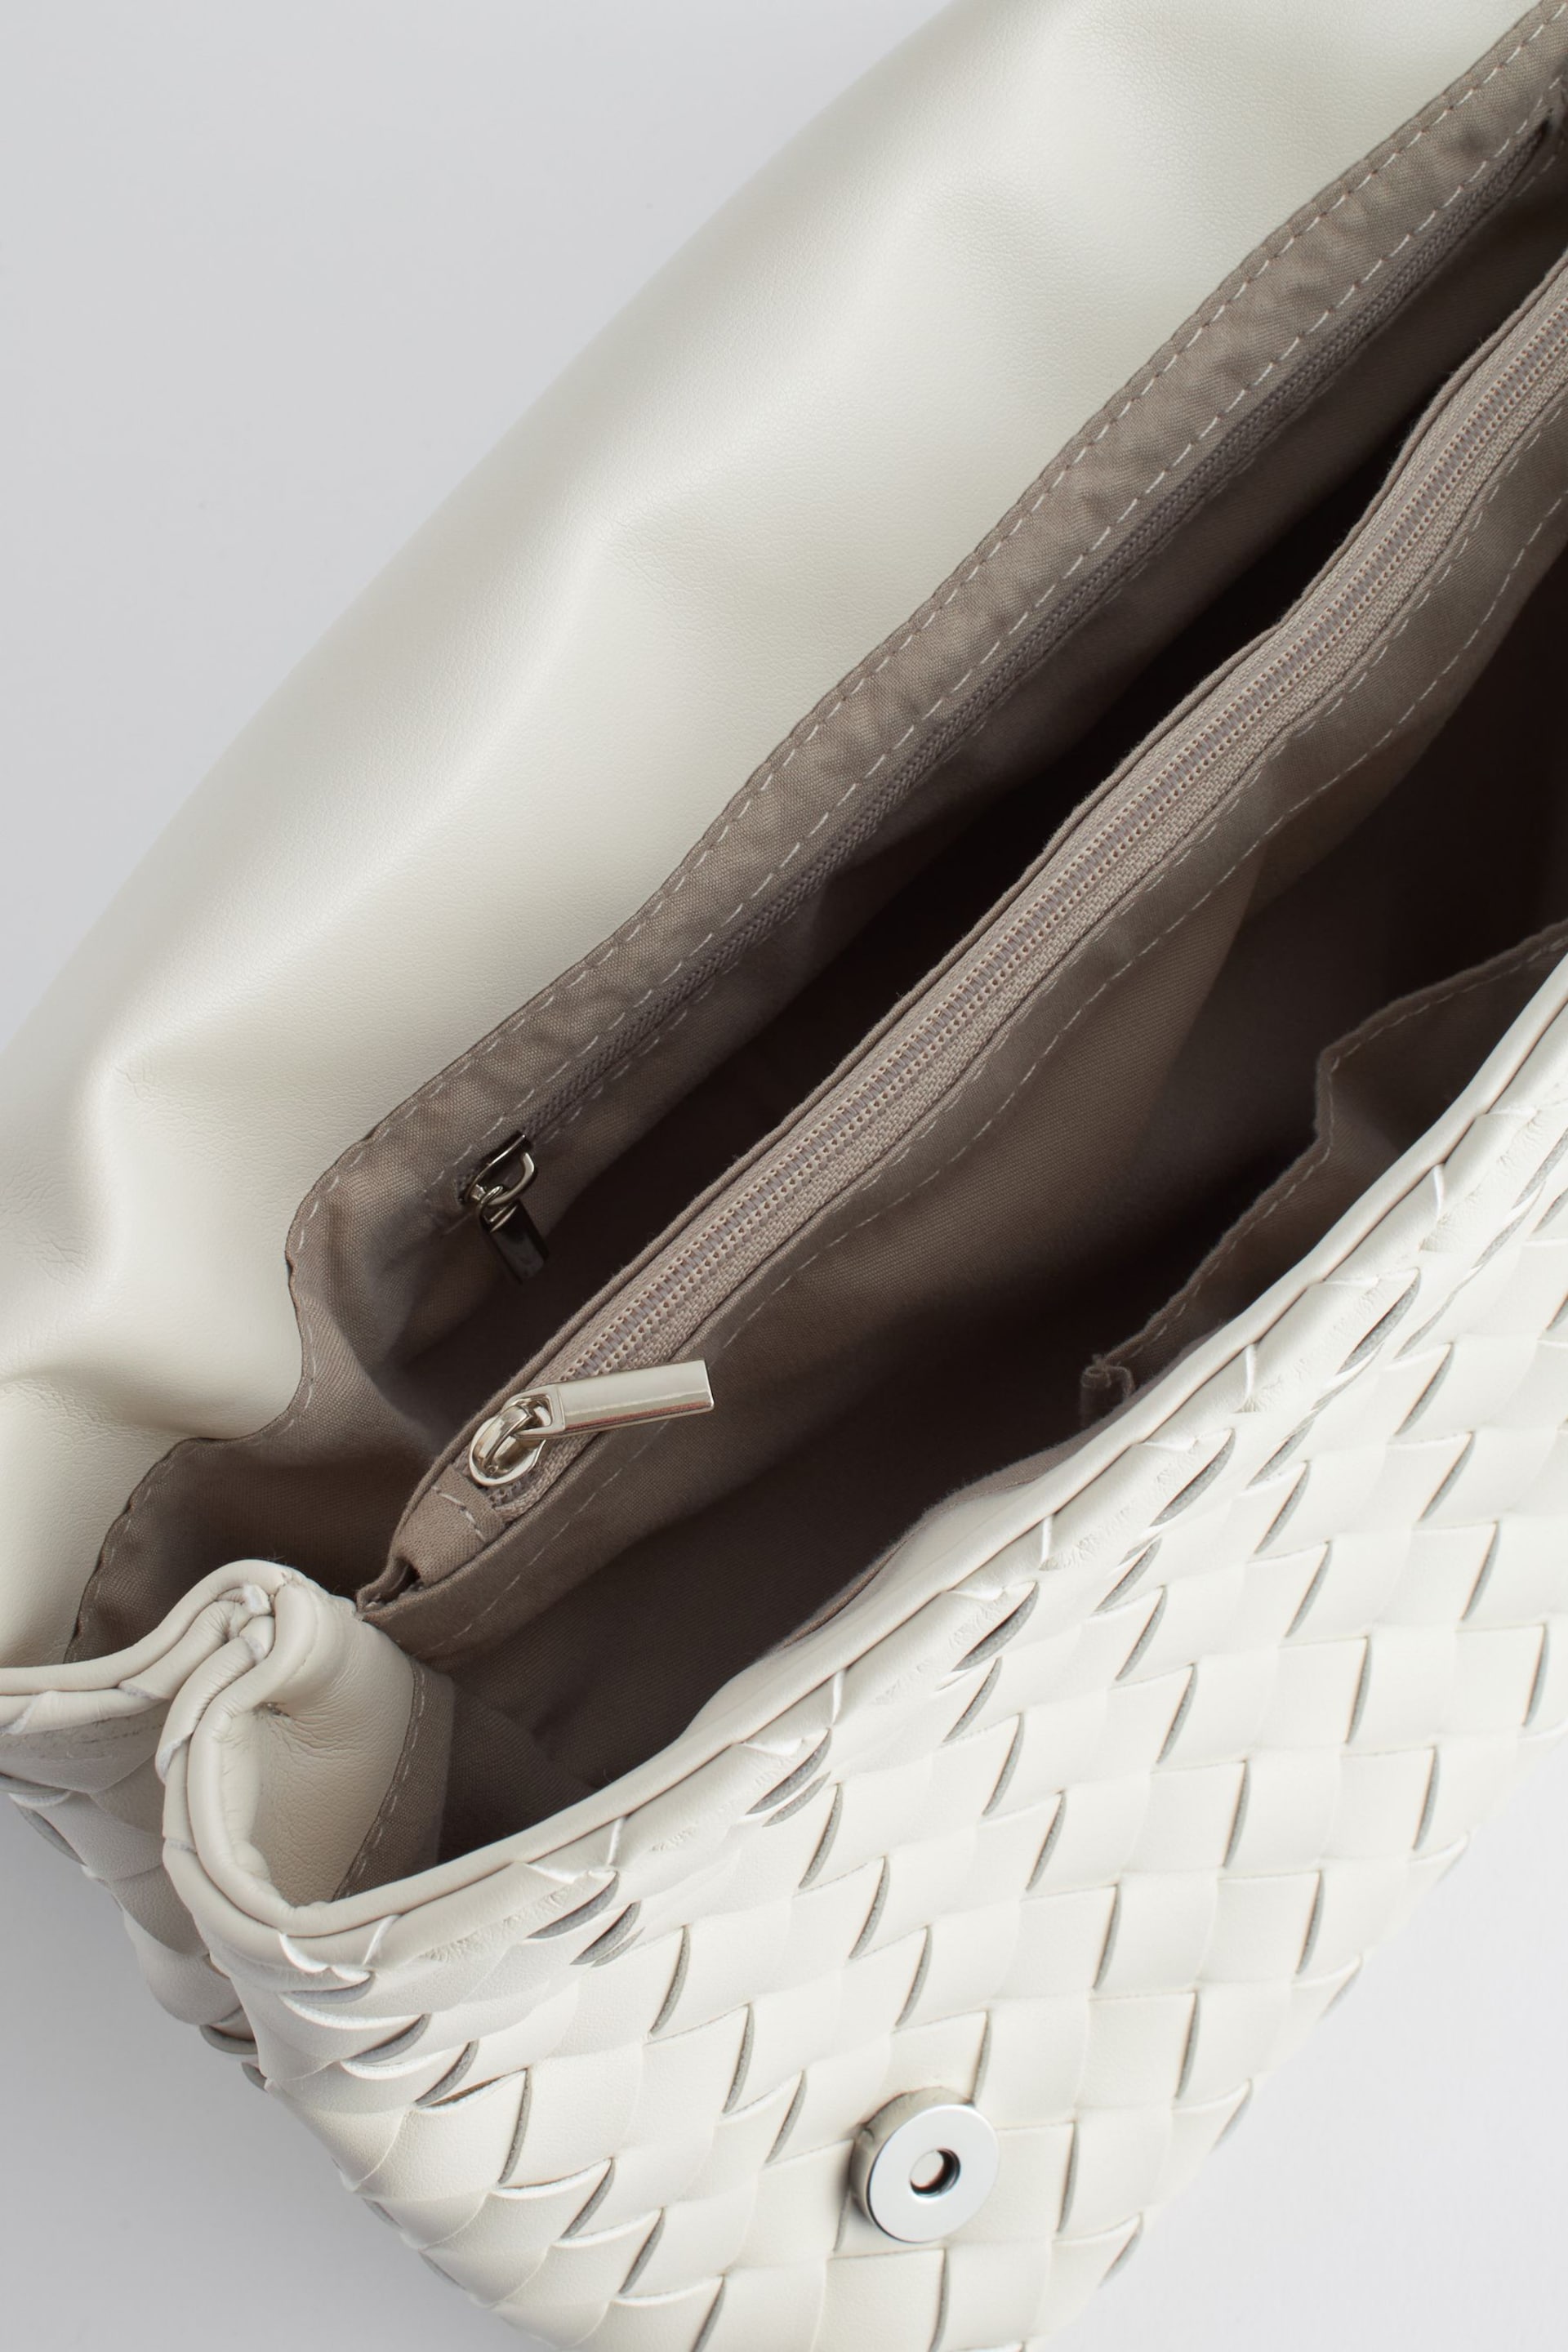 White Weave Clutch Bag - Image 8 of 9